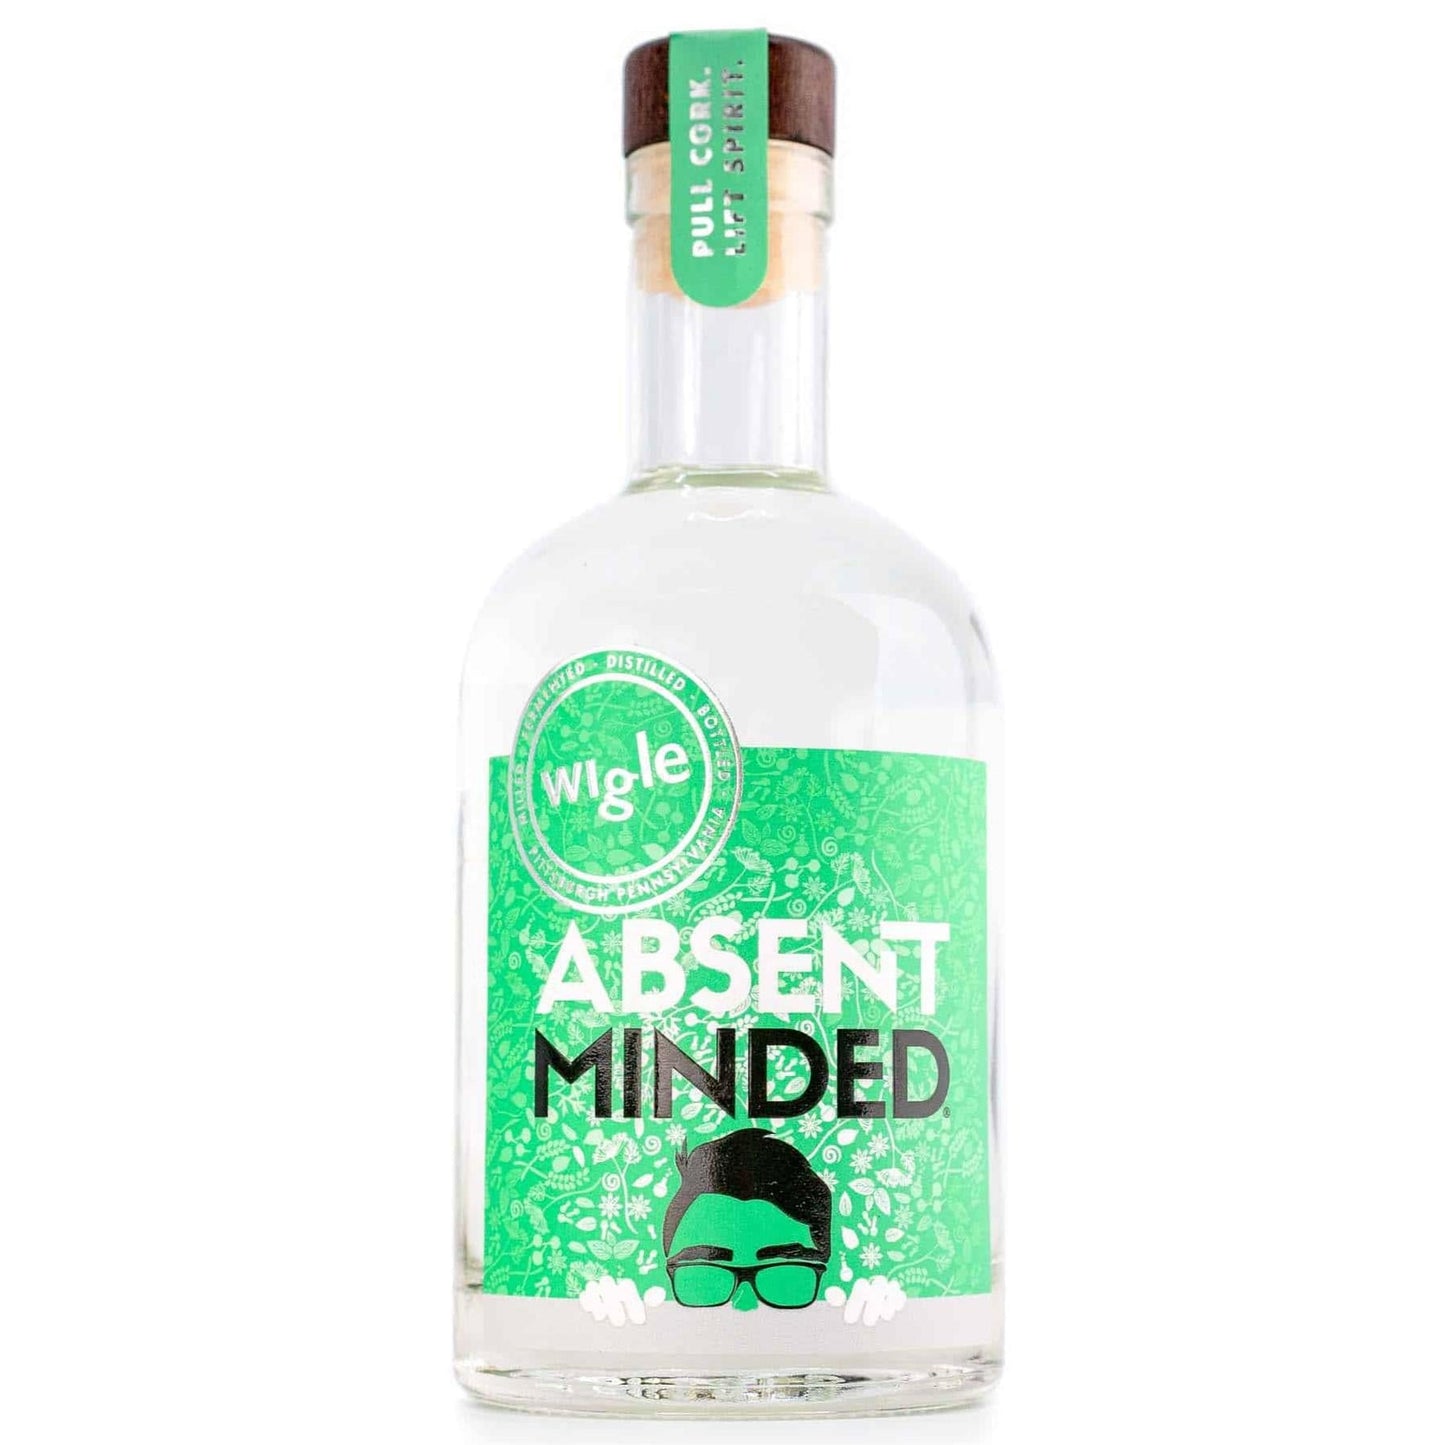 Wigle Whiskey - 'Absent Minded' Absinthe (375ML) - The Epicurean Trader